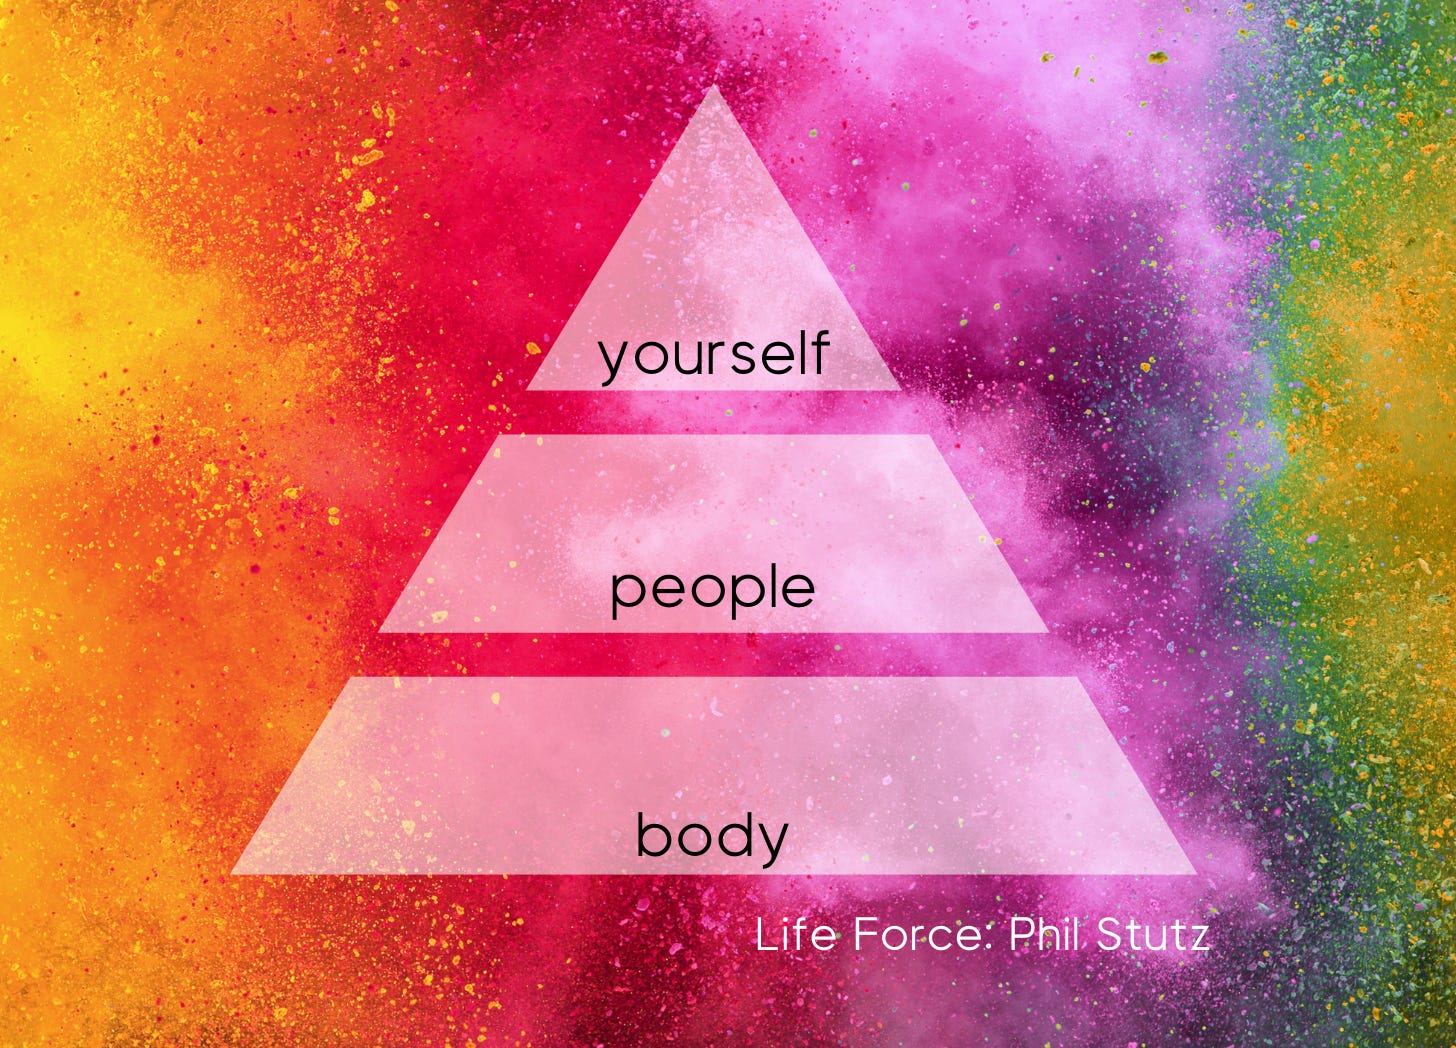 Your life force has 3 levels like a pyramid. This image shows a 3-part pyramid on a rainbow splash background. The bottom tier says Body, then People, then Yourself at the top. Concept by Phil Stutz. 